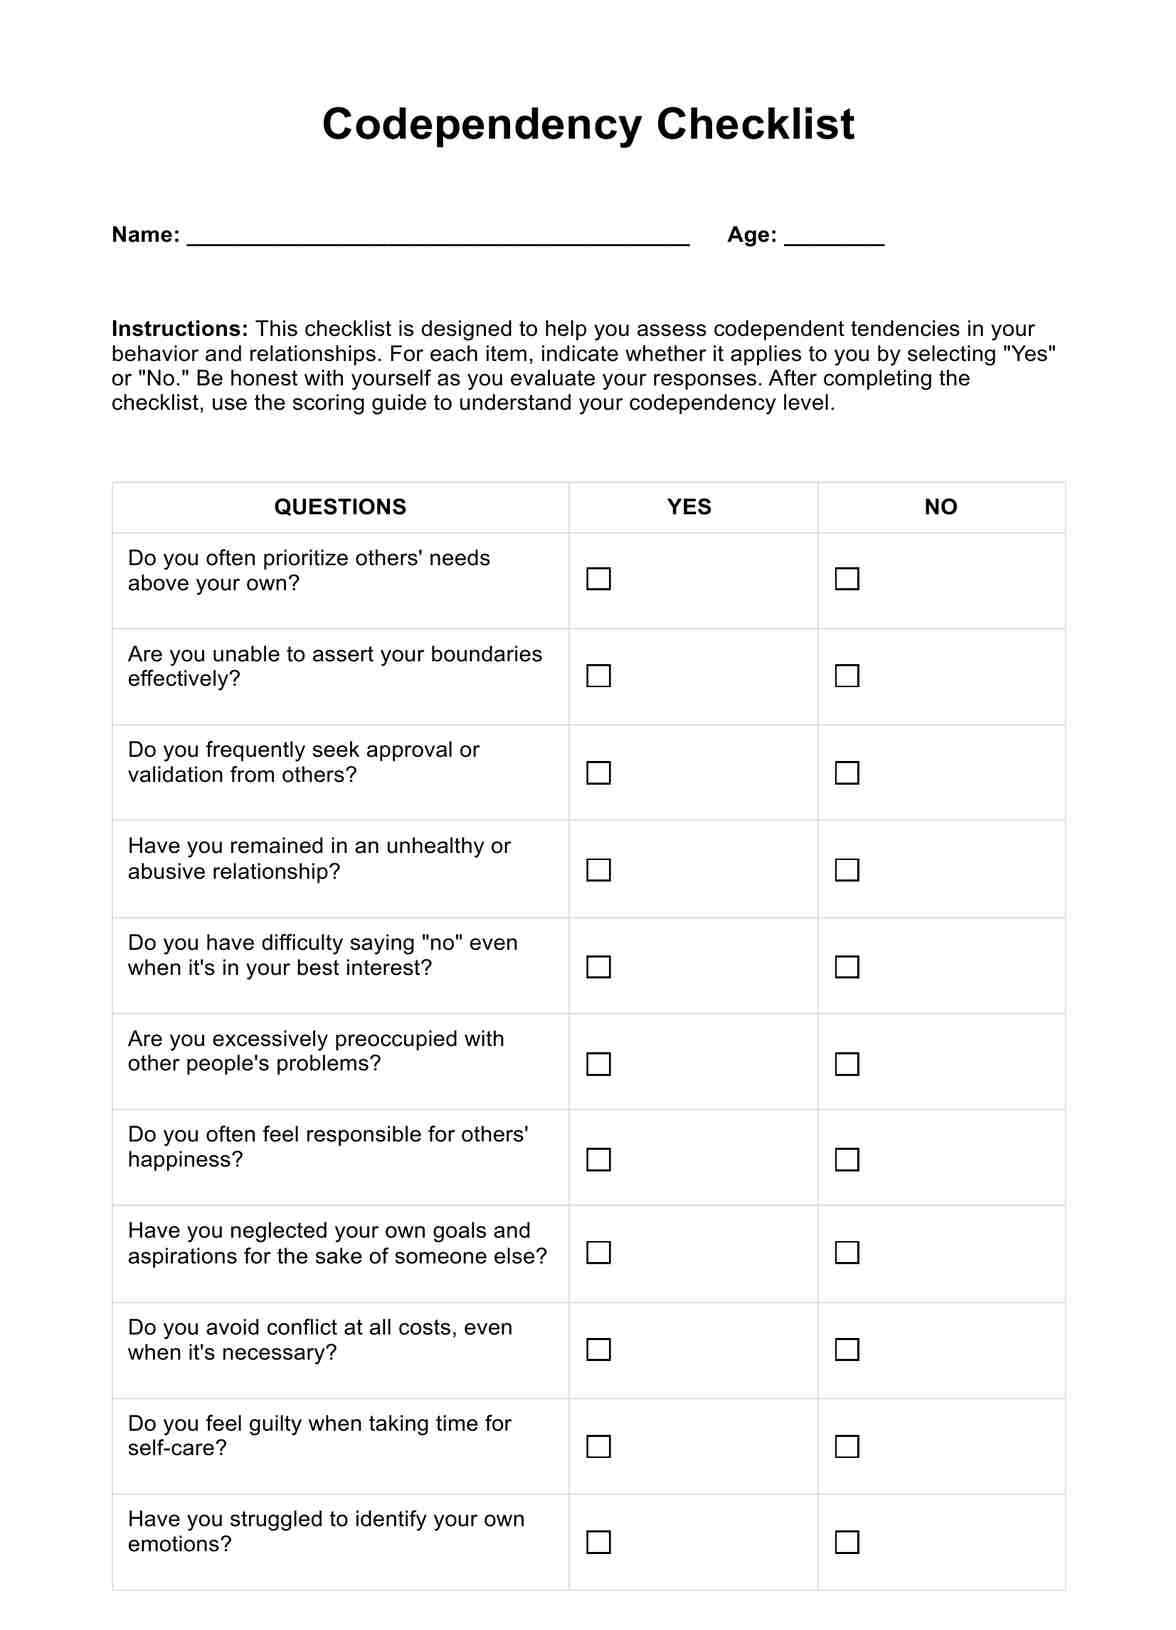 Codependency Checklists PDF Example